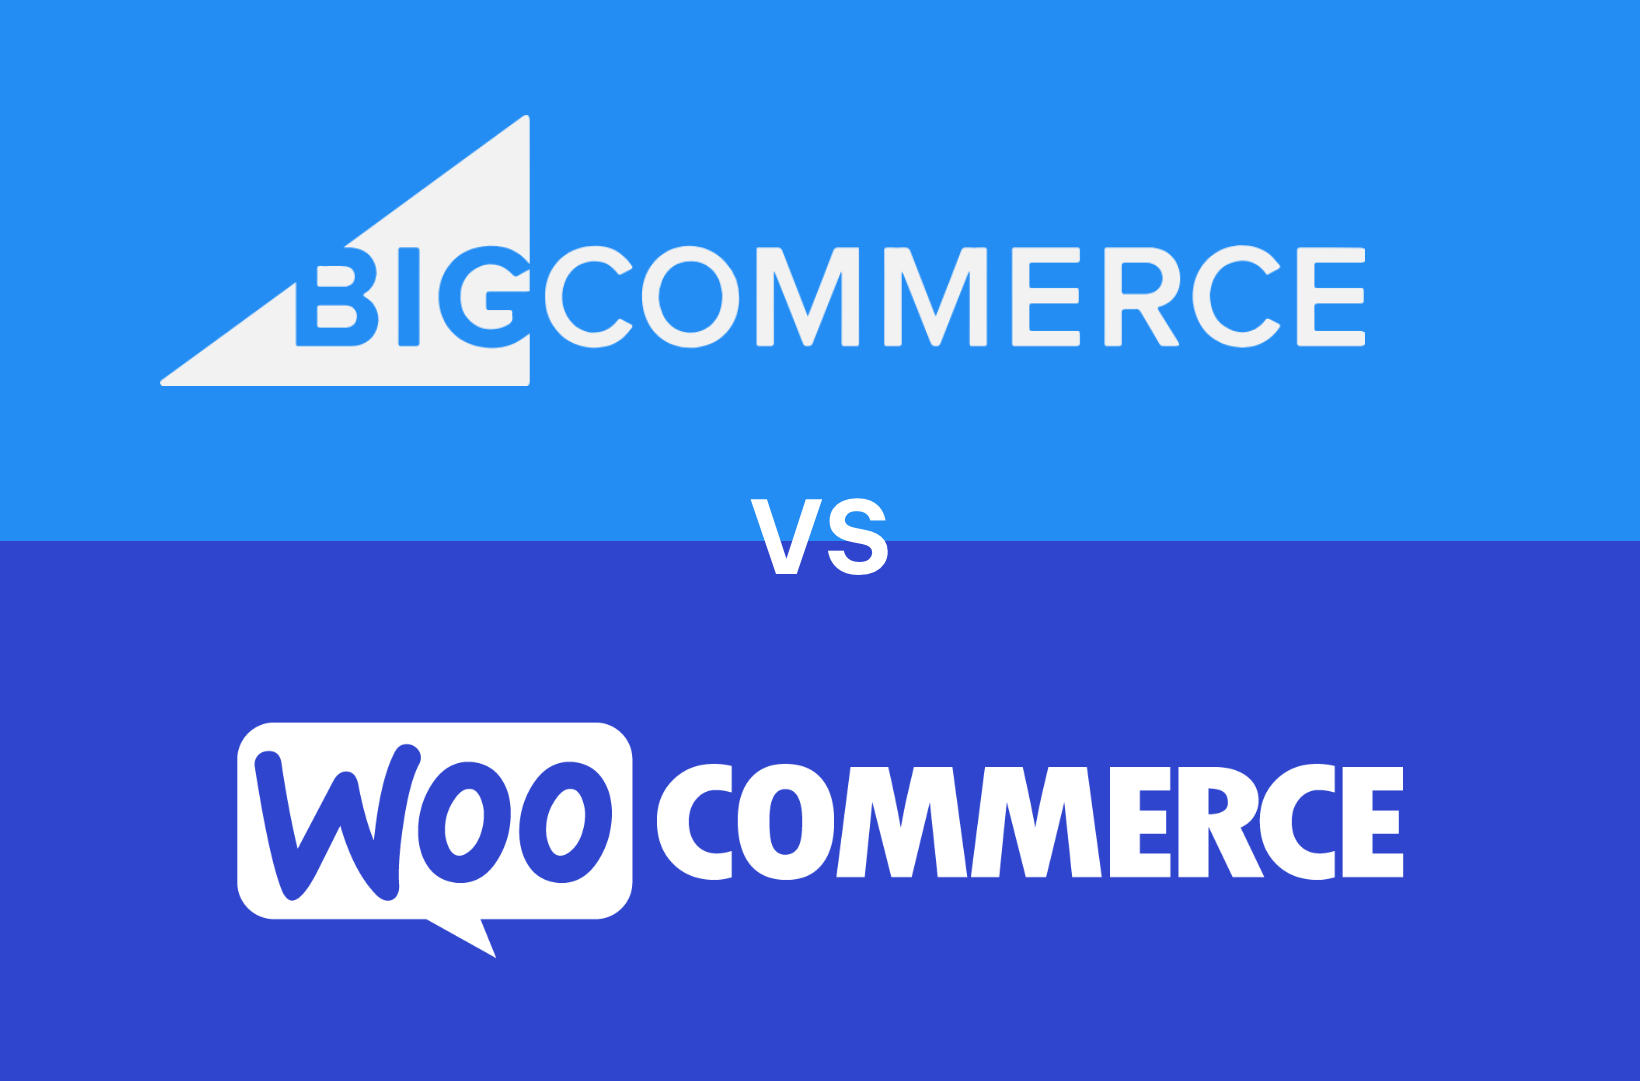 BigCommerce vs WooCommerce: What’s the Best Choice?